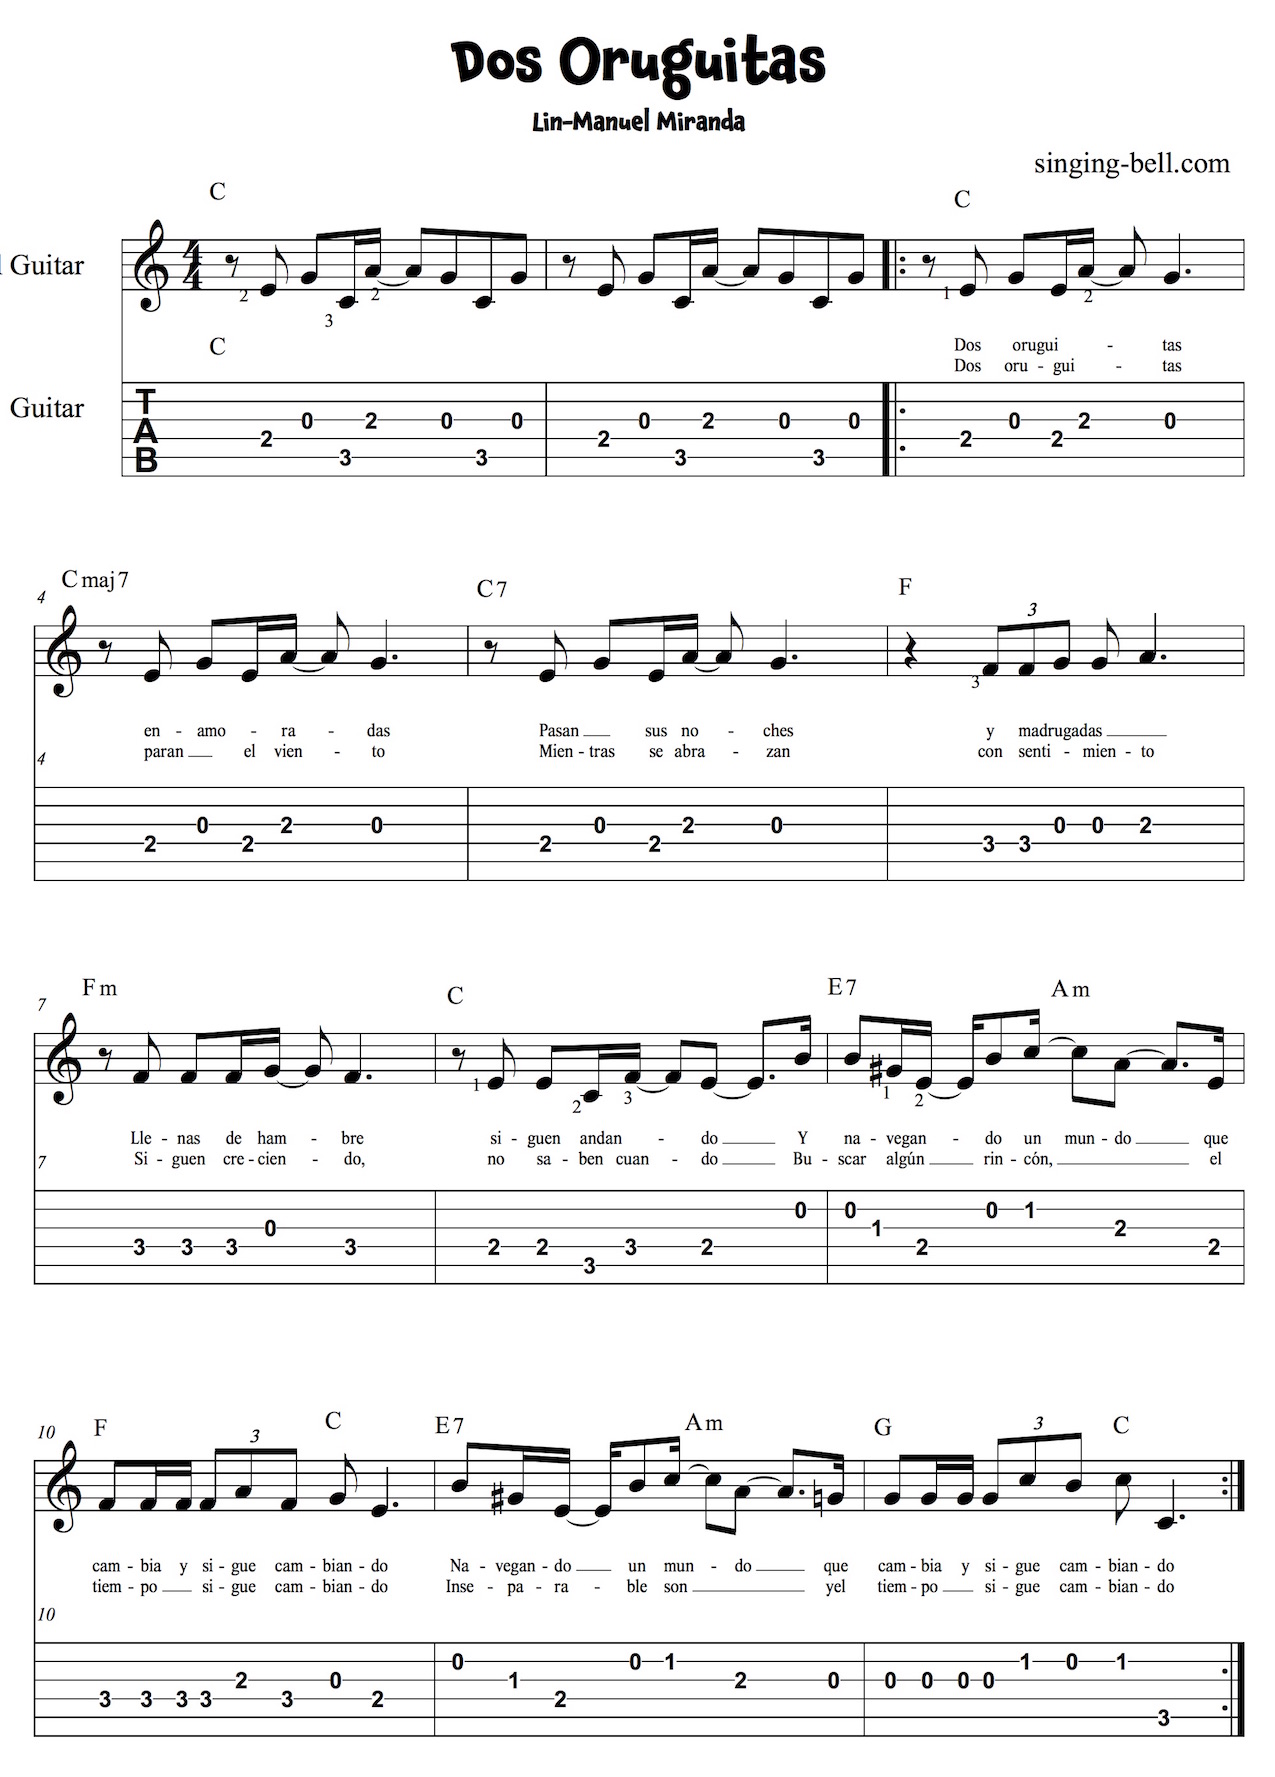 Dos Oruguitas Easy Guitar Sheet Music with notes and tablature page 1.